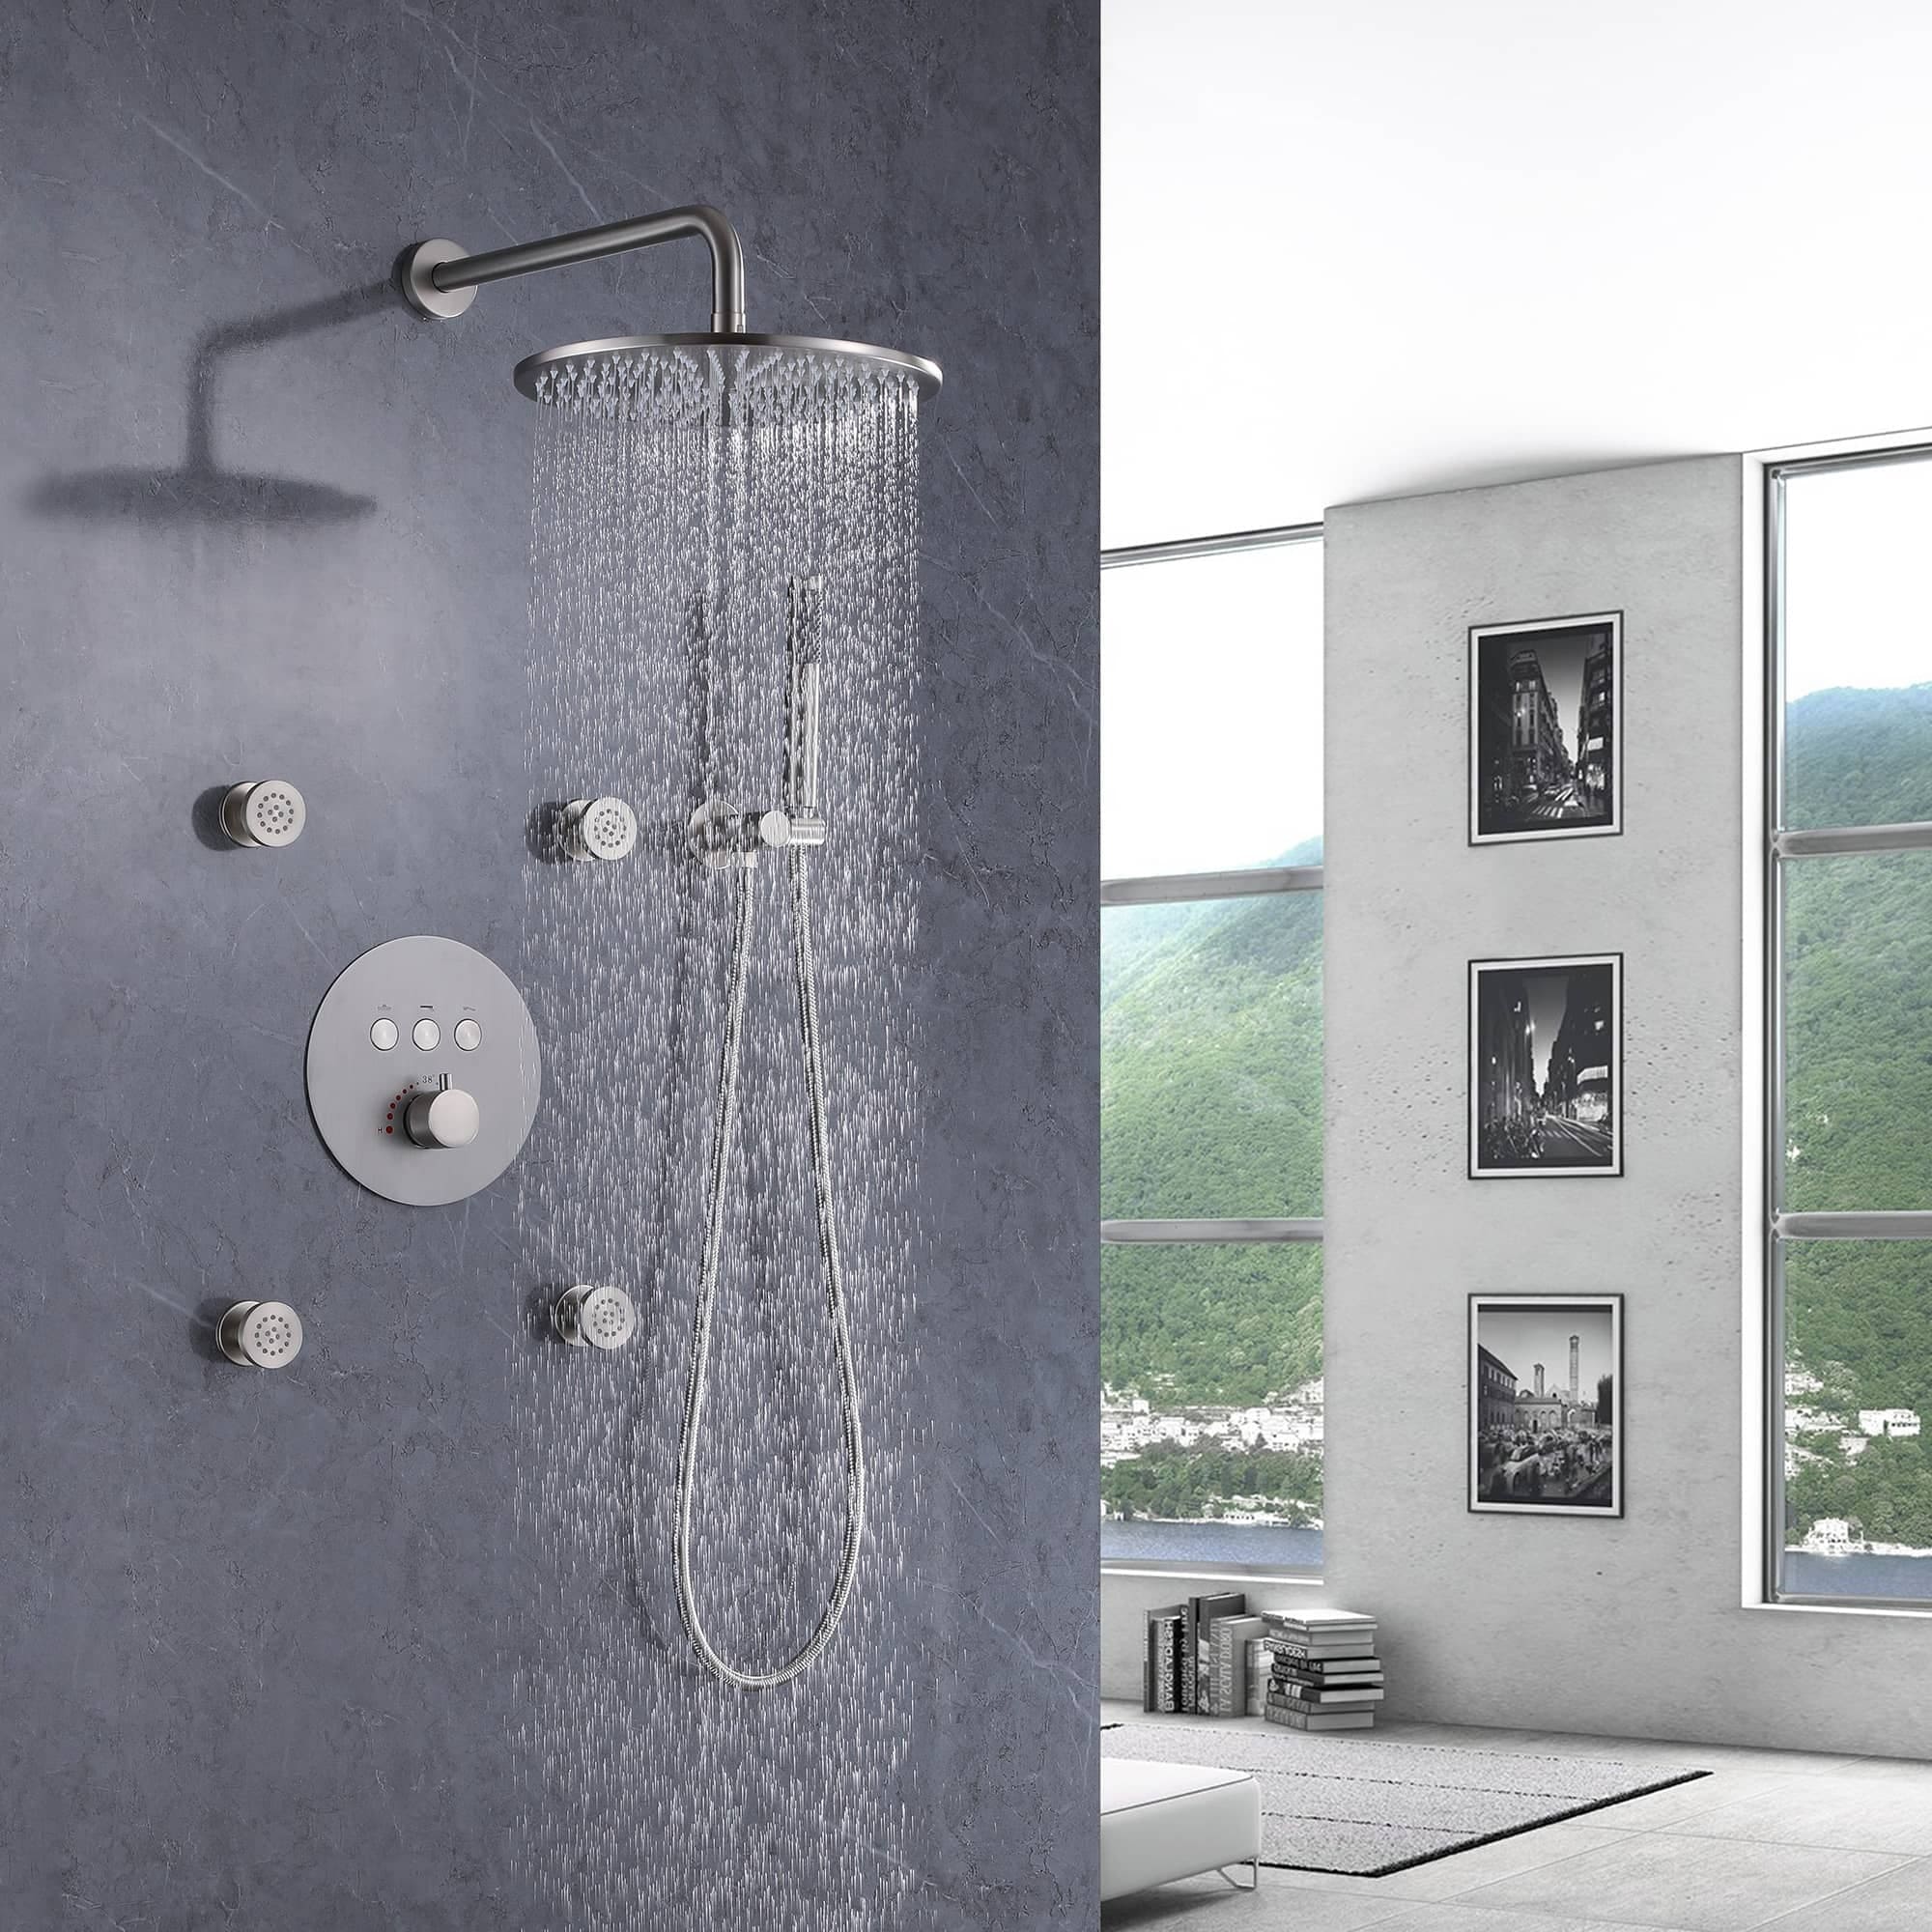 https://ak1.ostkcdn.com/images/products/is/images/direct/c9d483a947e64ded354d623c69254d64a090edb2/Thermostatic-Shower-System-With-Rough-in-Valve-Wall-Mount-Shower-Faucet-With-Body-Jet-And-Hand-Shower-12-Inch-Shower-Head-Set.jpg